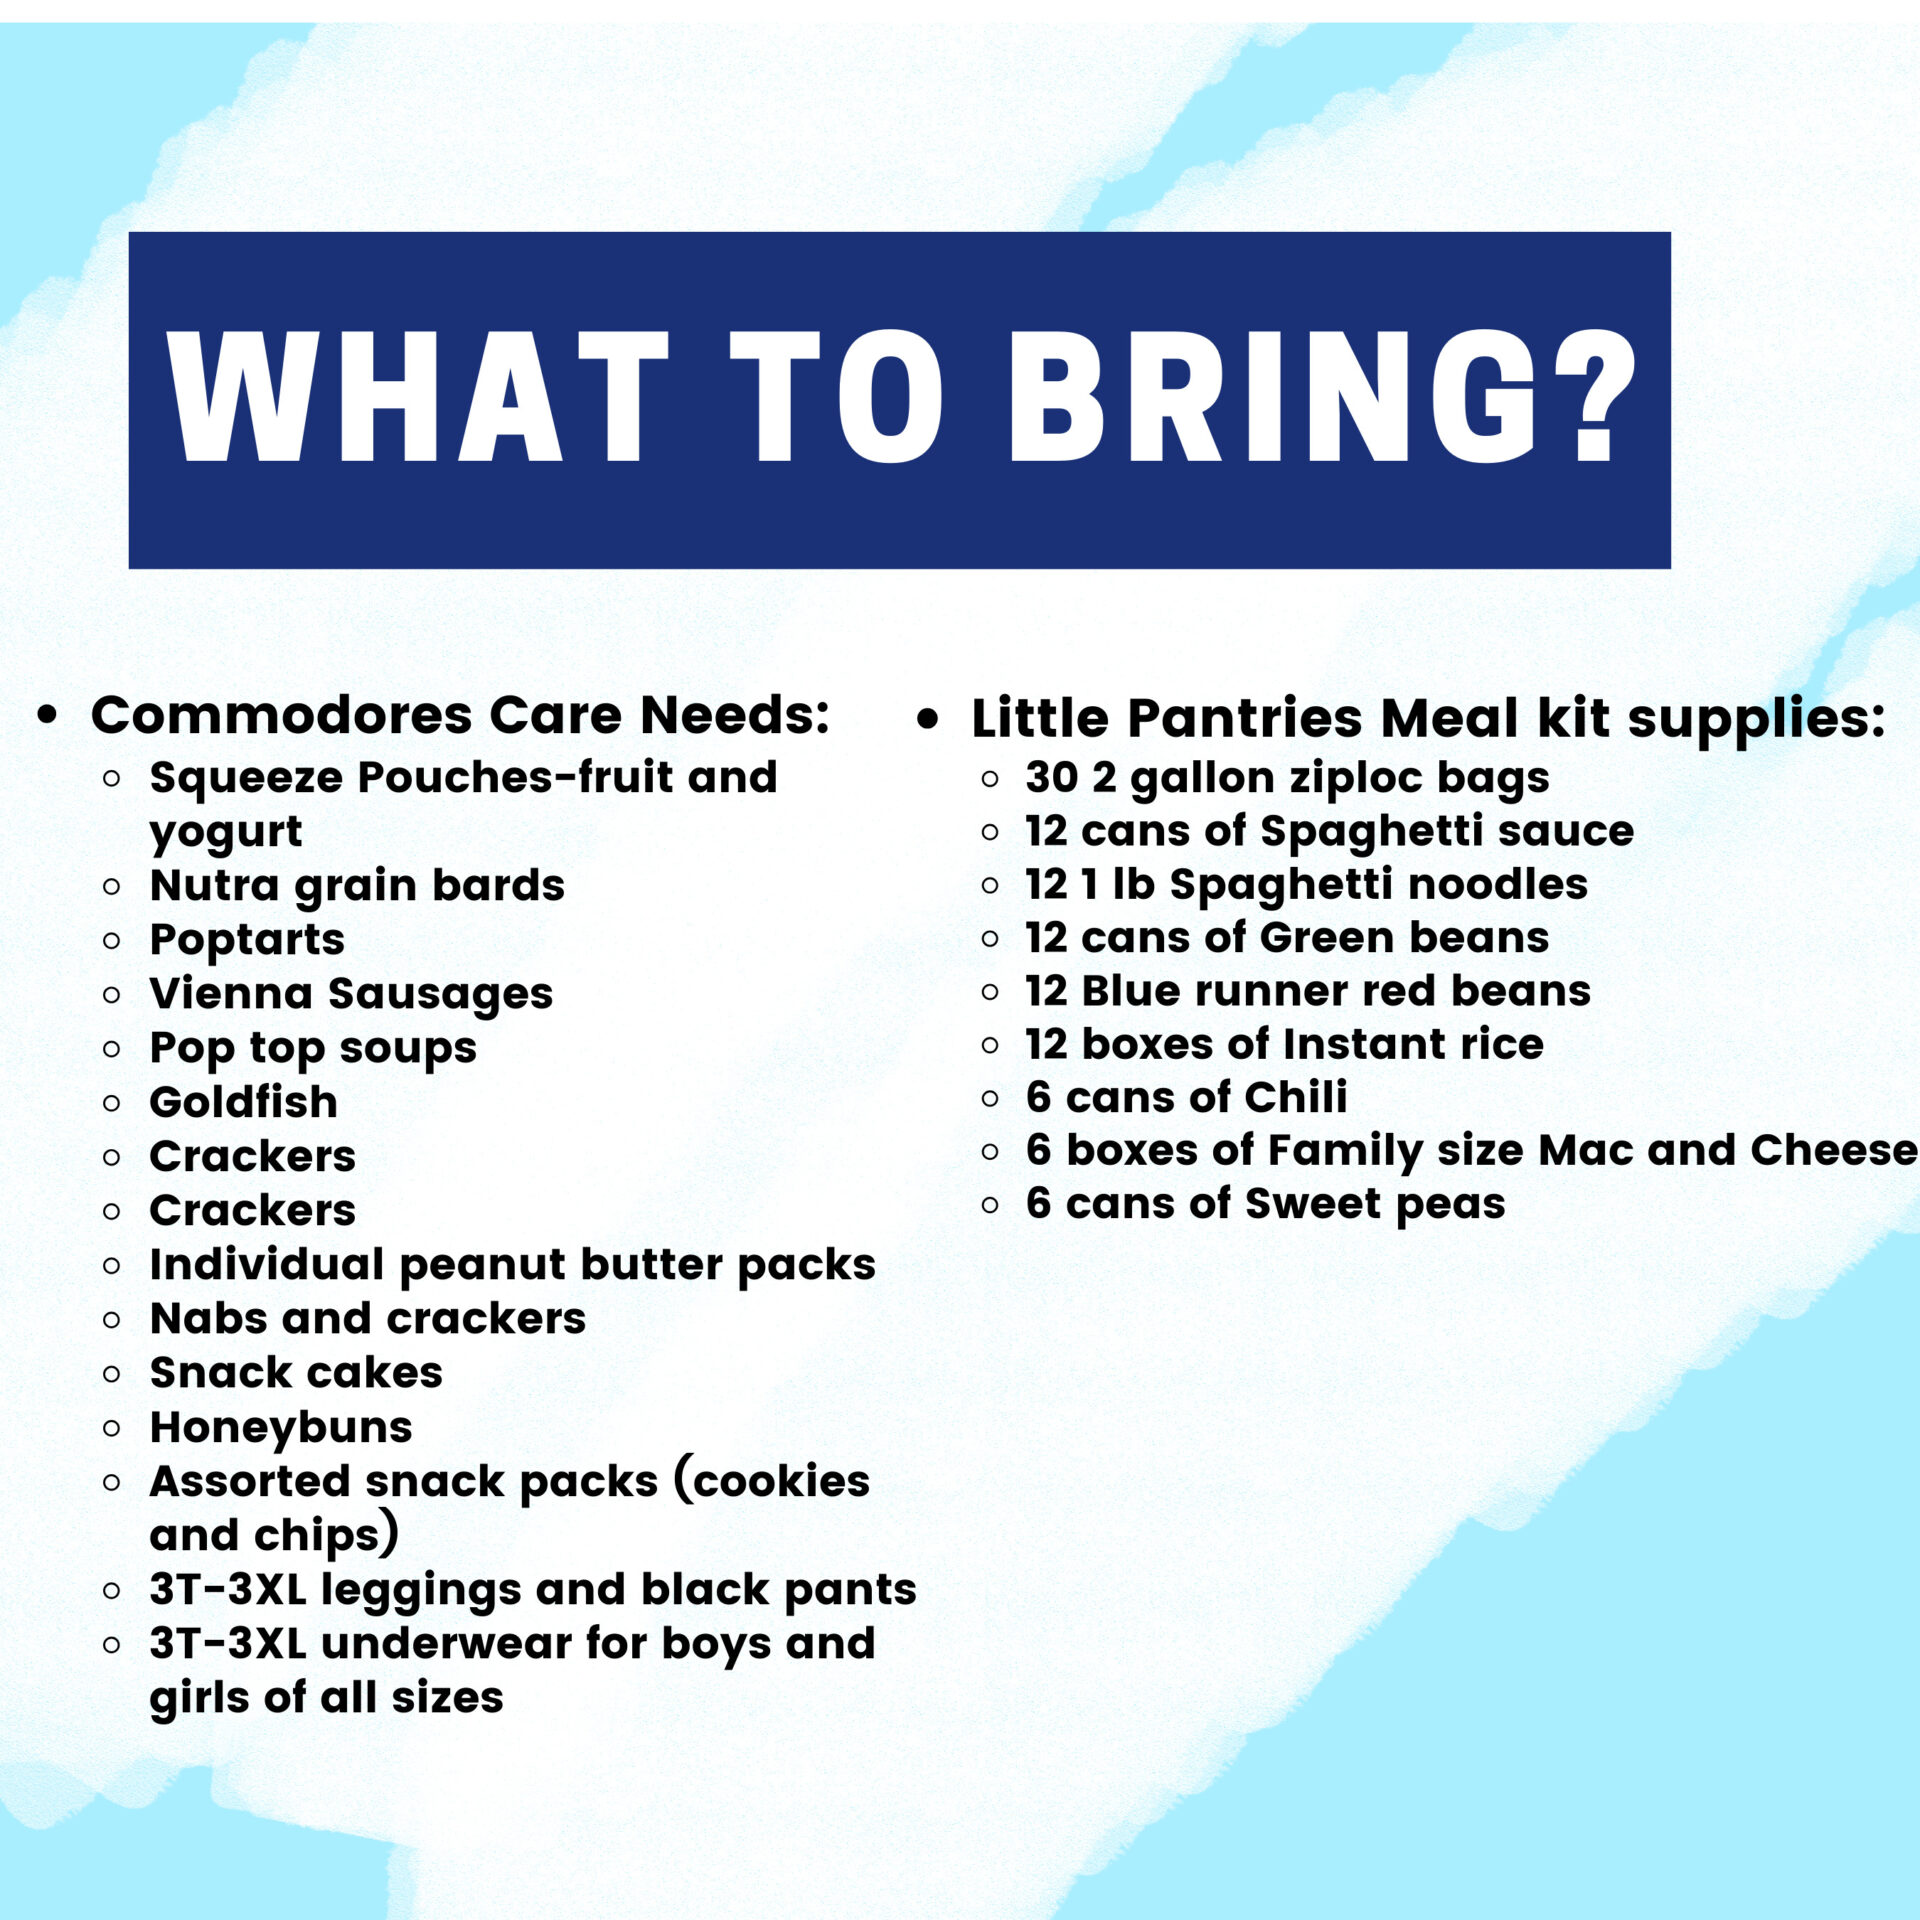 OPD Collecting Donations for Commodores Care, Little Pantries on Friday 